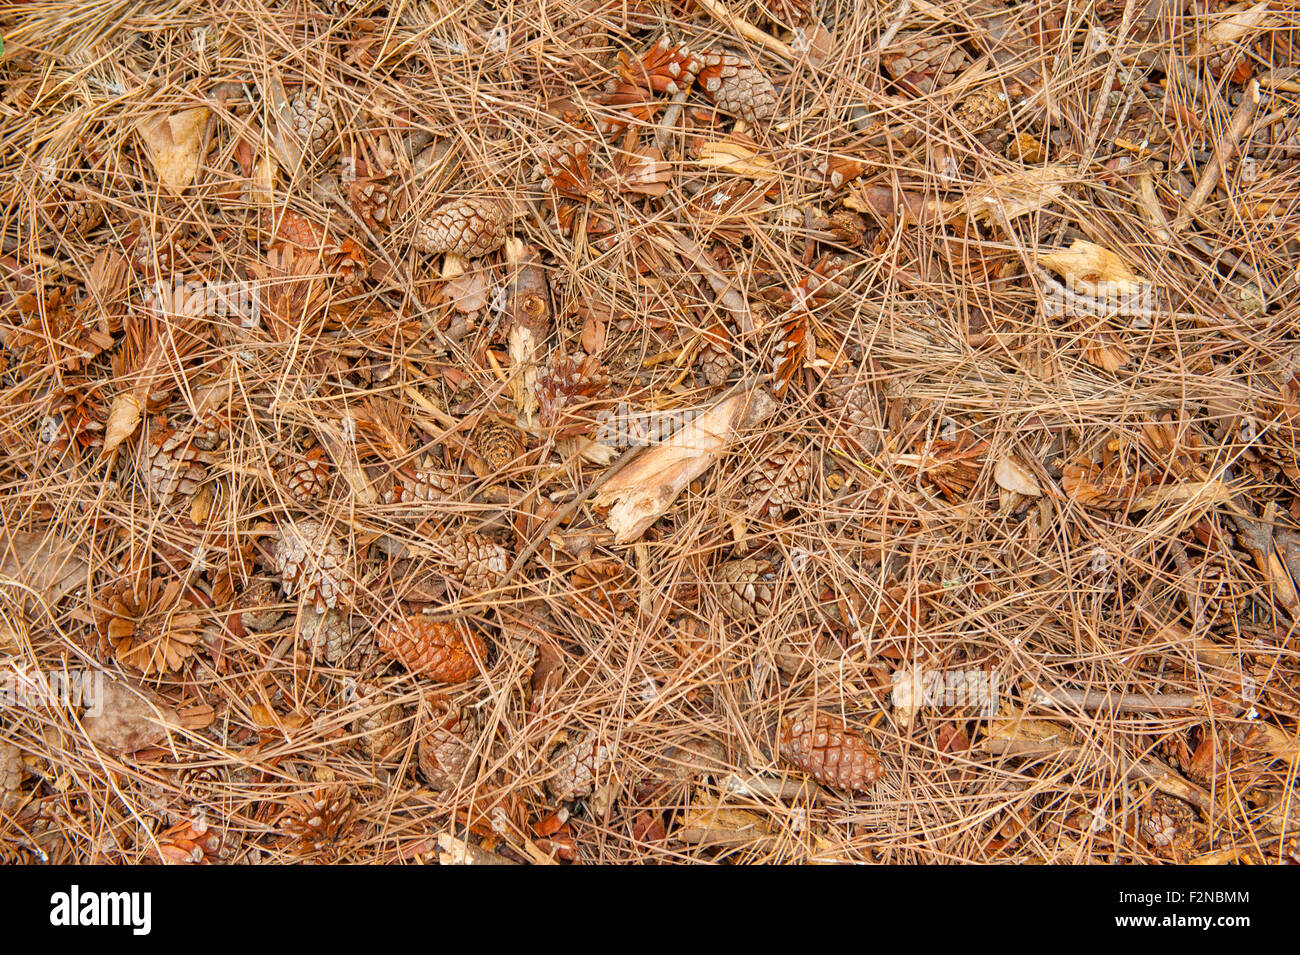 Natural undergrowth background texture with brown pine cones and needles Stock Photo